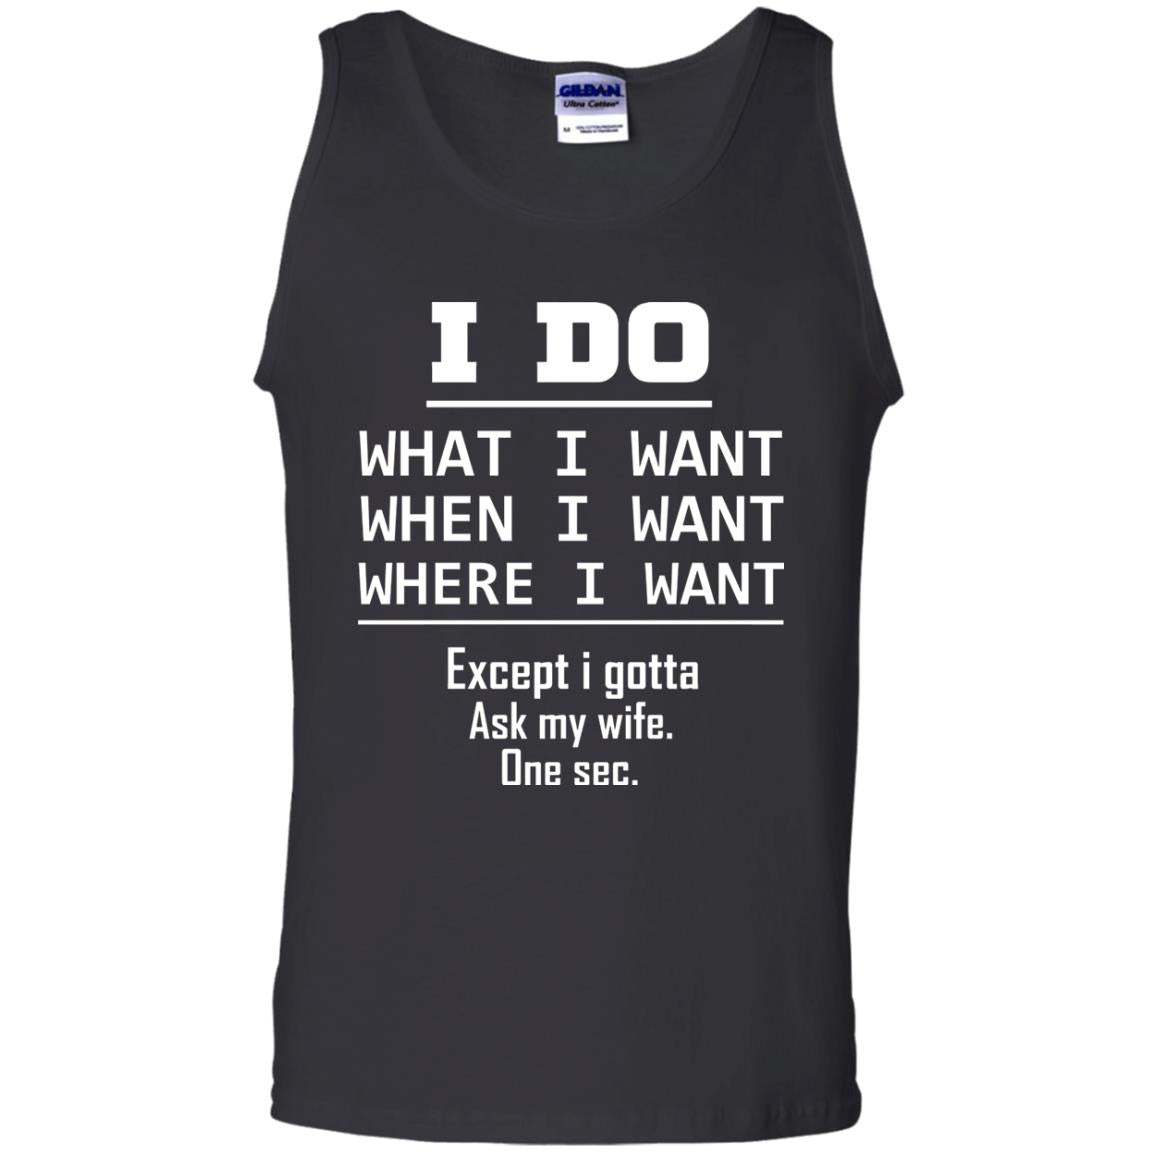 I Do What I Want When I Want Where I Want Except I Gotta Ask My Wife One Sec ShirtG220 Gildan 100% Cotton Tank Top